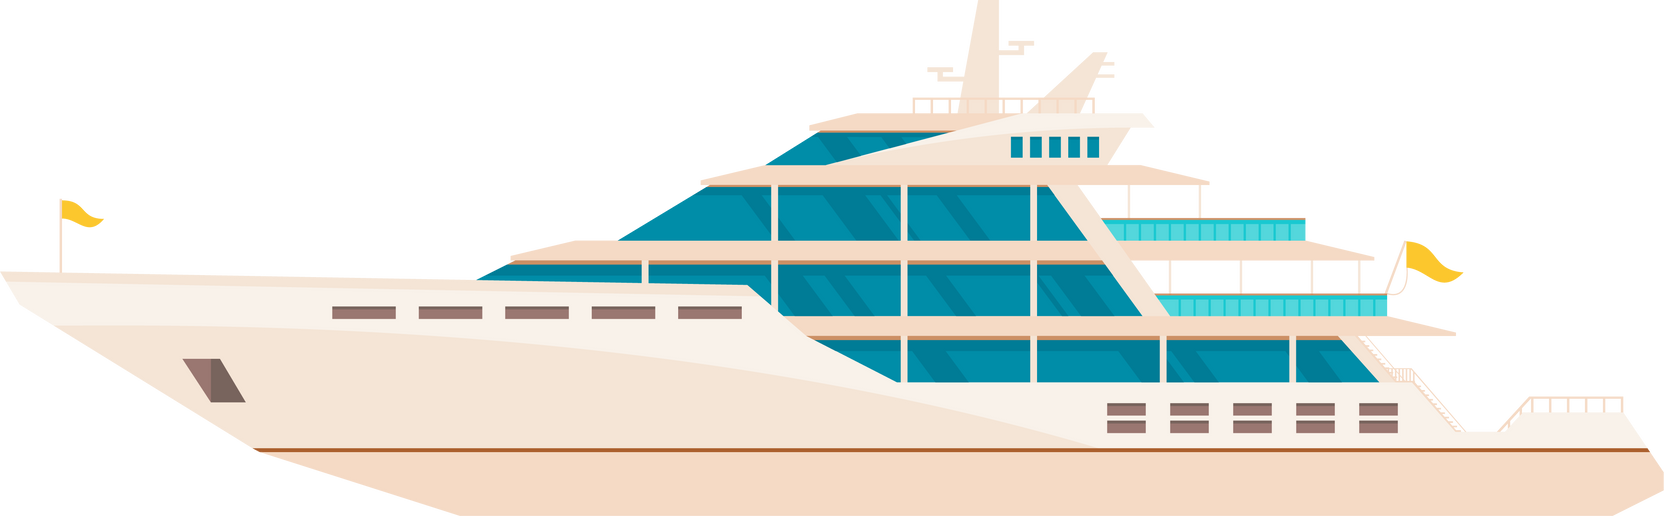 Party yacht. Marine luxury ship color icon